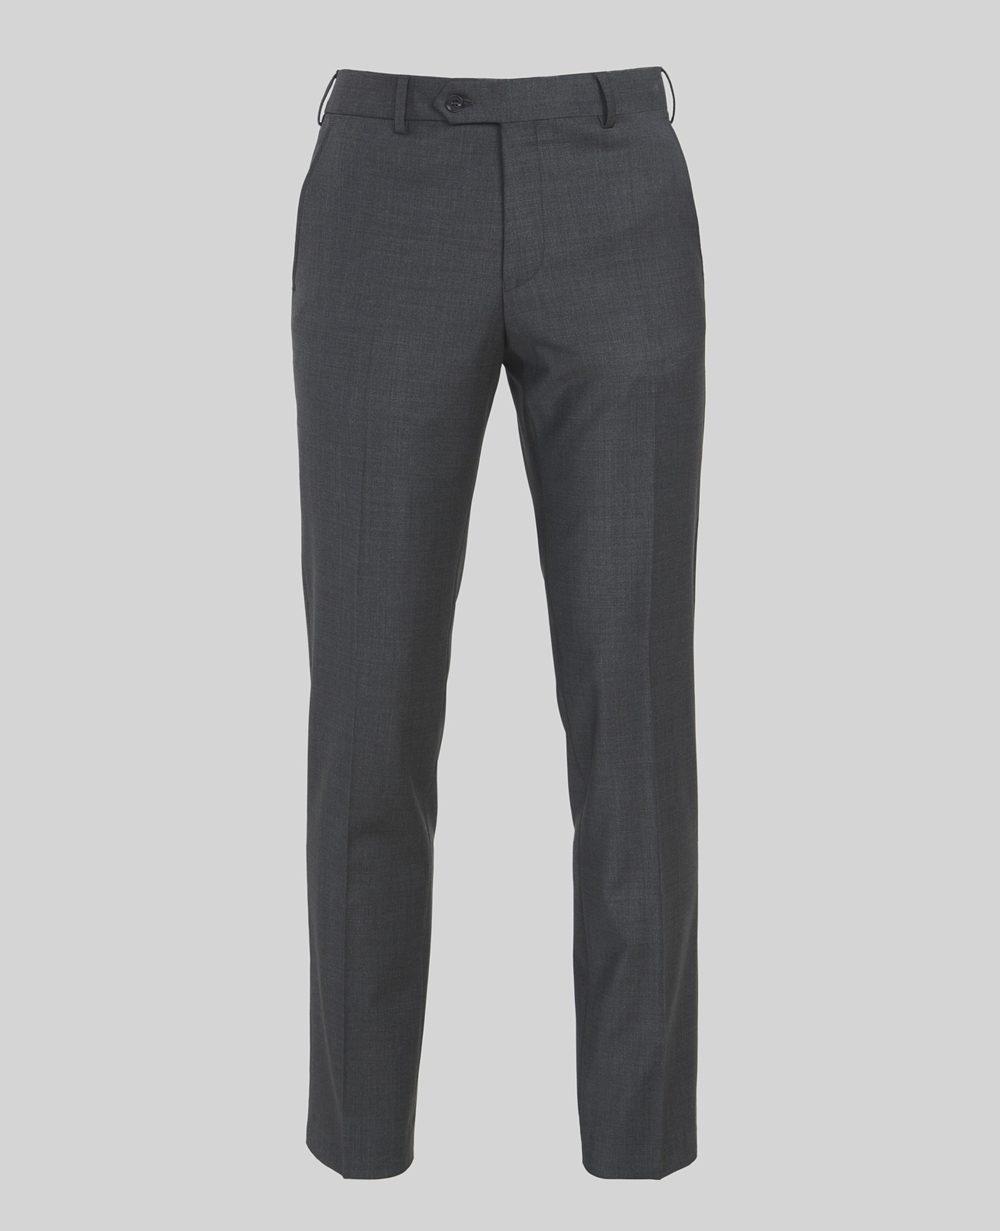 Tolka Grey Suit Trousers